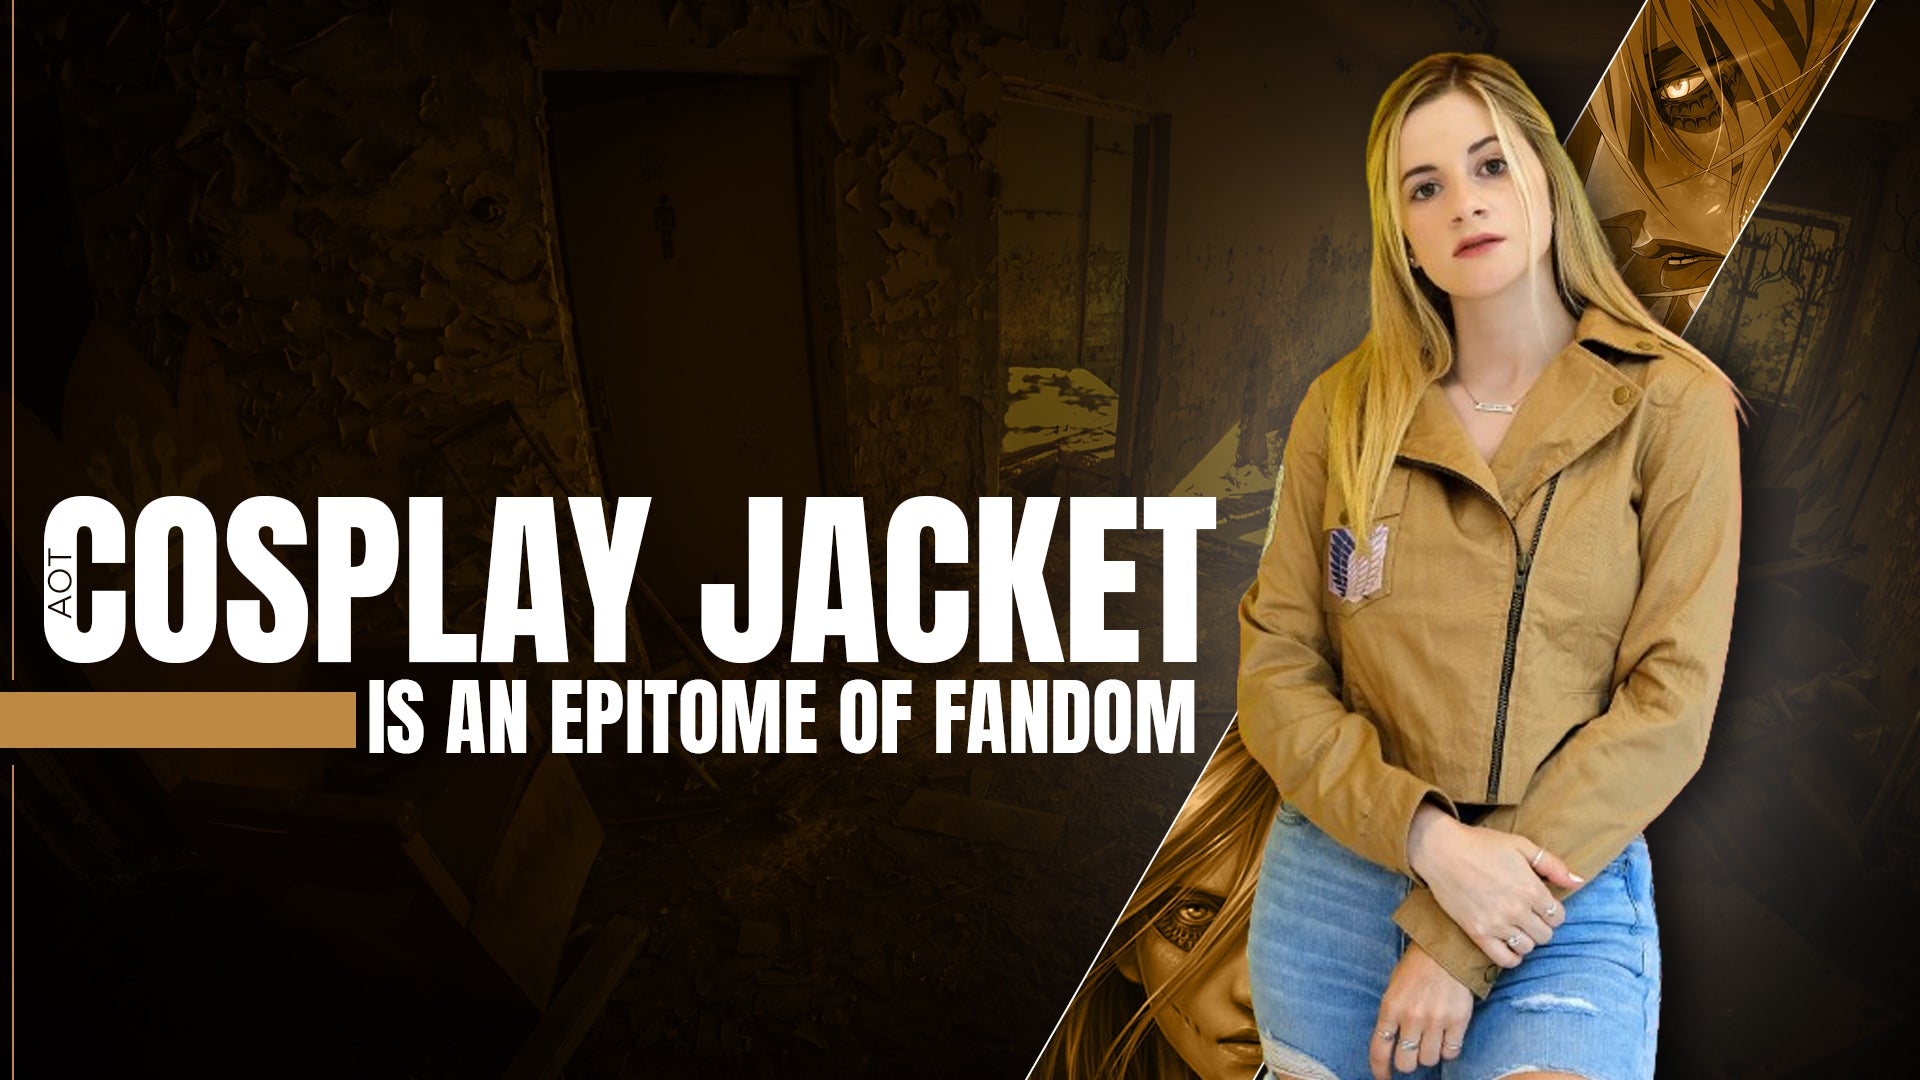 AOT Cosplay Jacket is the Epitome of Fandom